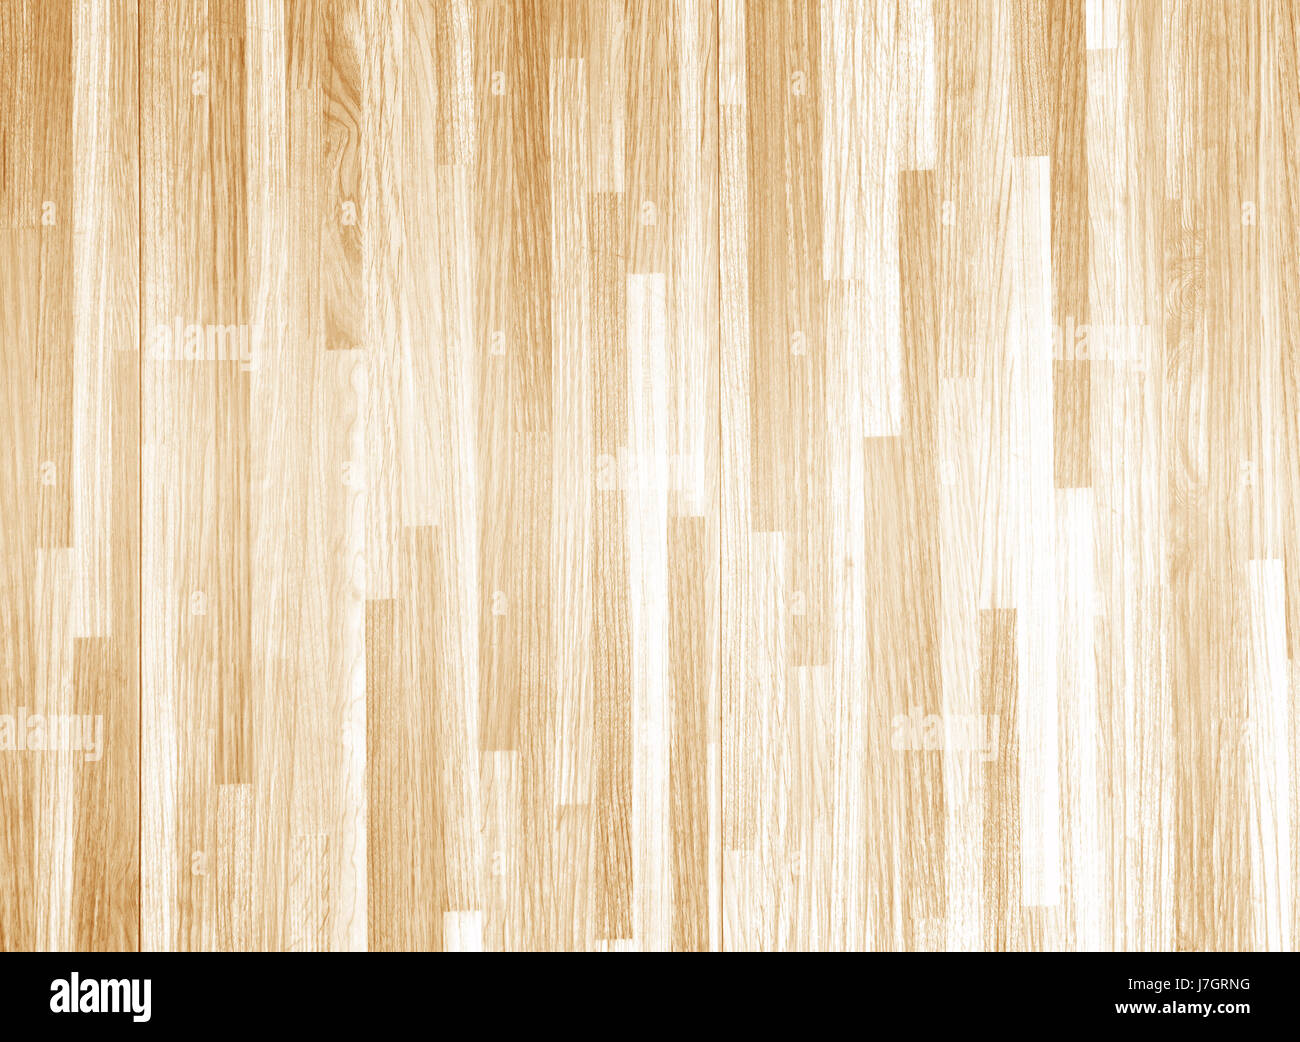 Texture of wood background closeup Hardwood maple basketball court floor  viewed from above Stock Photo - Alamy